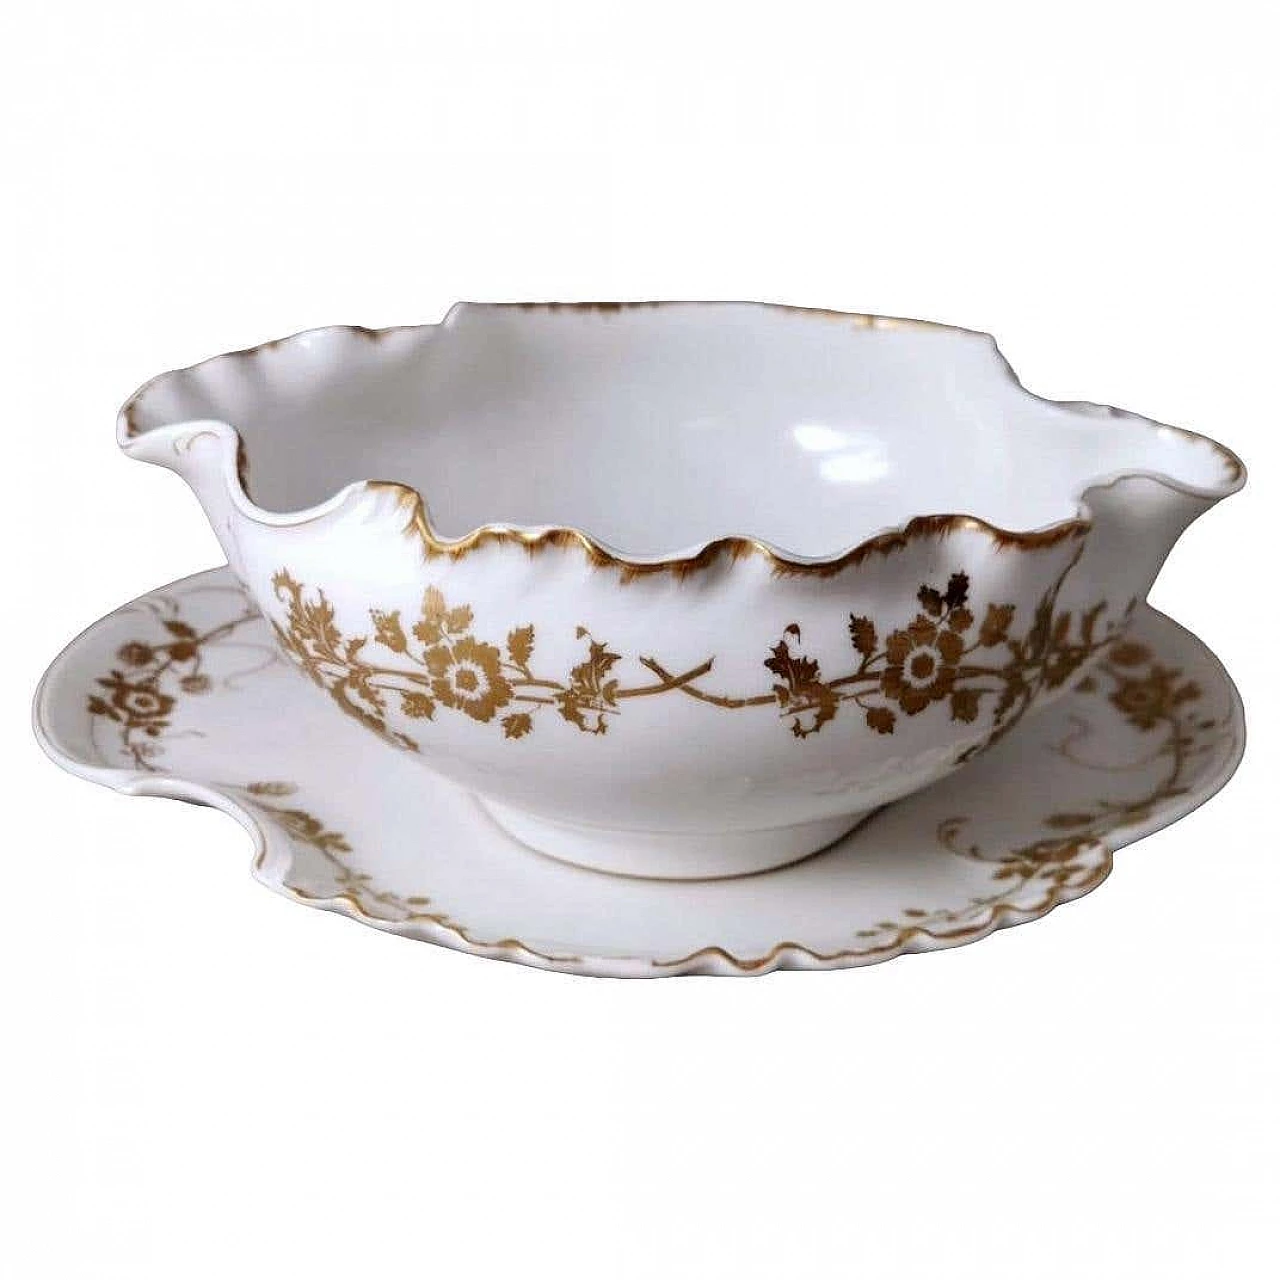 Salad bowl with tray in Limoges porcelain by Haviland & Co., early 20th century 18